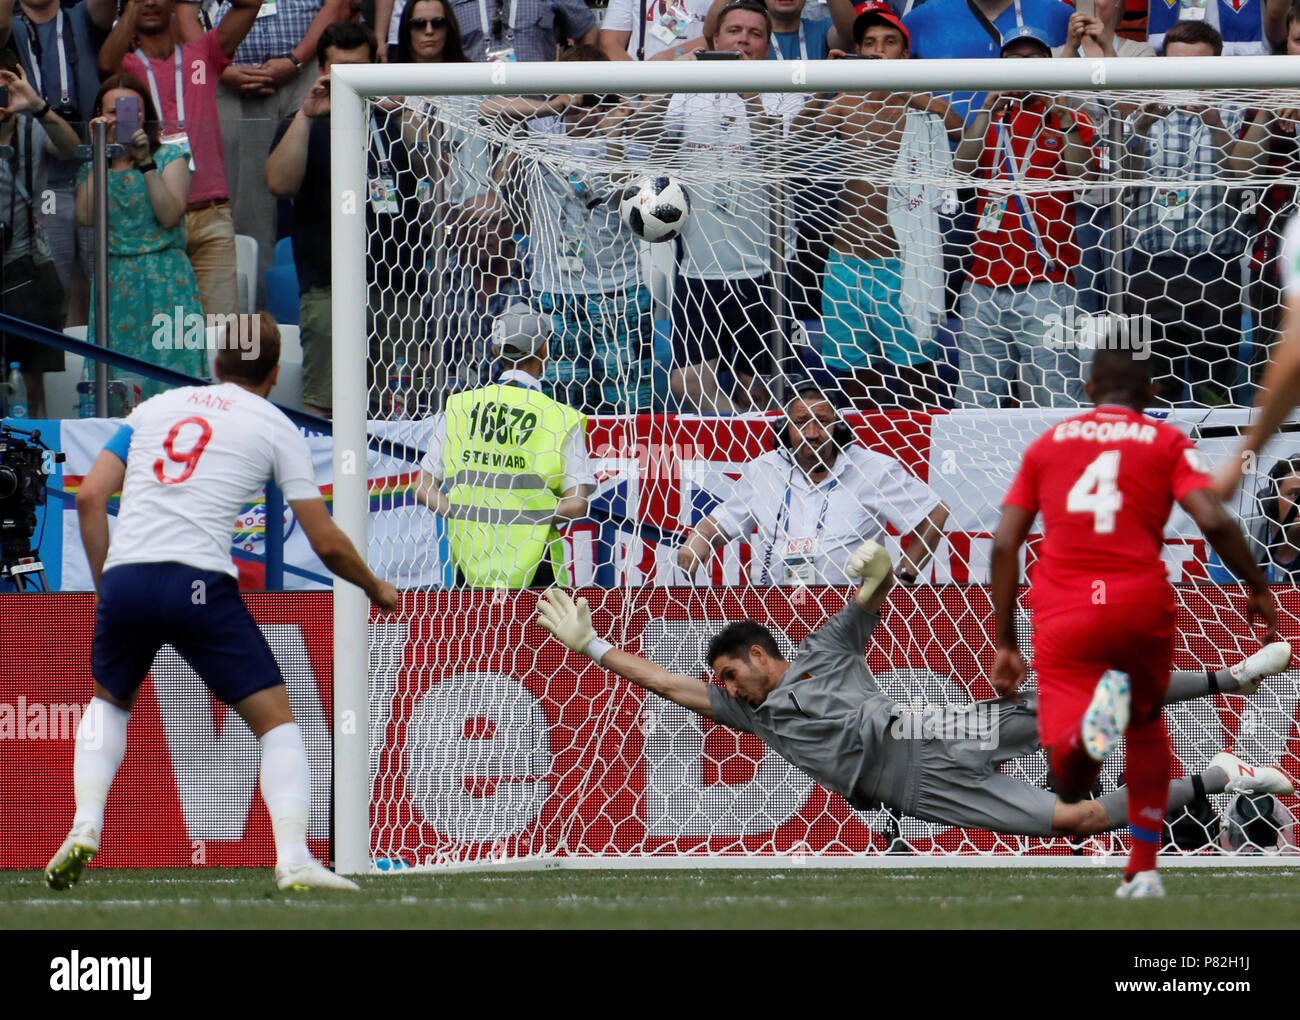 NIZHNY NOVGOROD, RUSSIA - JUNE 24: Harry Kane (L) of England national team scores a penalty shot past Jaime Penedo (C) of Panama national team during the 2018 FIFA World Cup Russia group G match between England and Panama at Nizhny Novgorod Stadium on June 24, 2018 in Nizhny Novgorod, Russia. (MB Media) Stock Photo